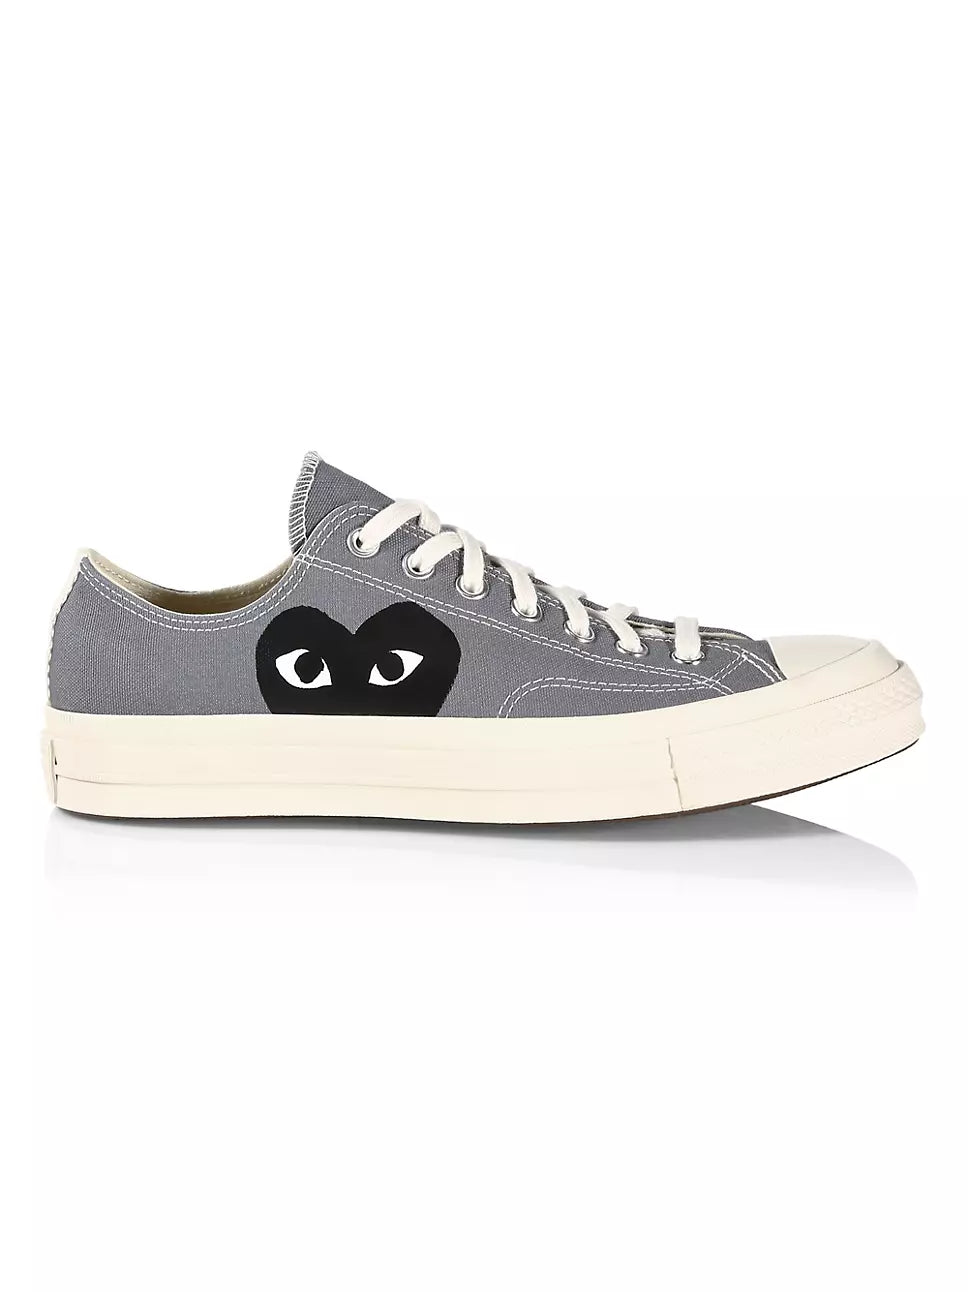 Converse Chuck Taylor Low All Star 70 OX (CDG) 'Grey' (675)